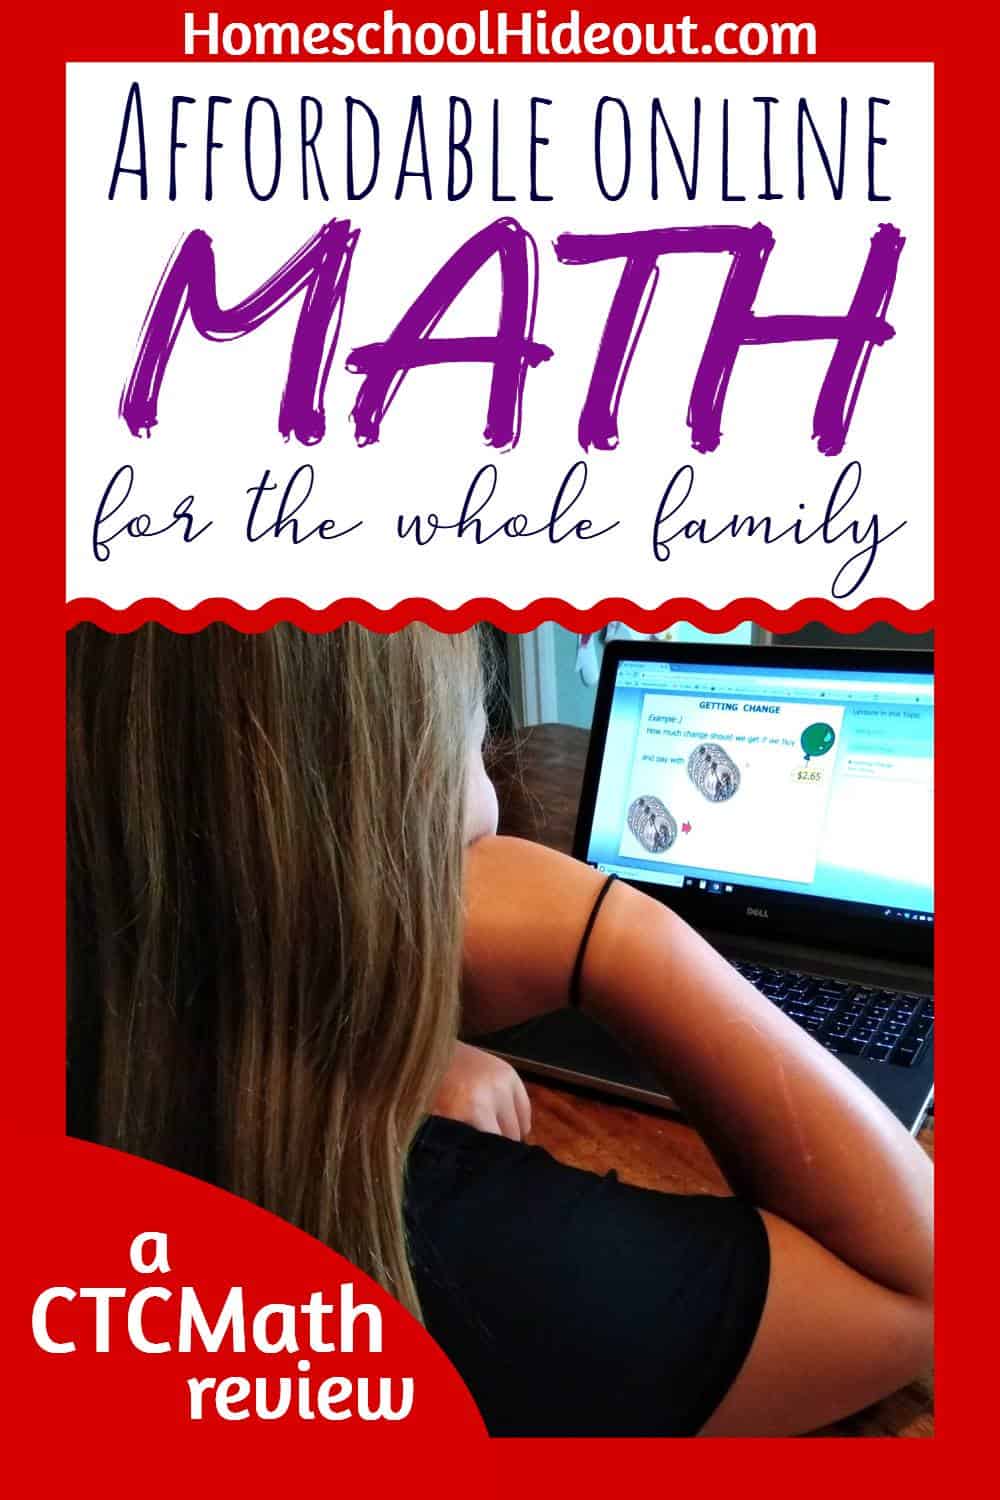 If you're looking for a curriculum that's perfect for the whole family, you don't want to miss CTCMath! It's affordable and thorough, perfect for any budget!